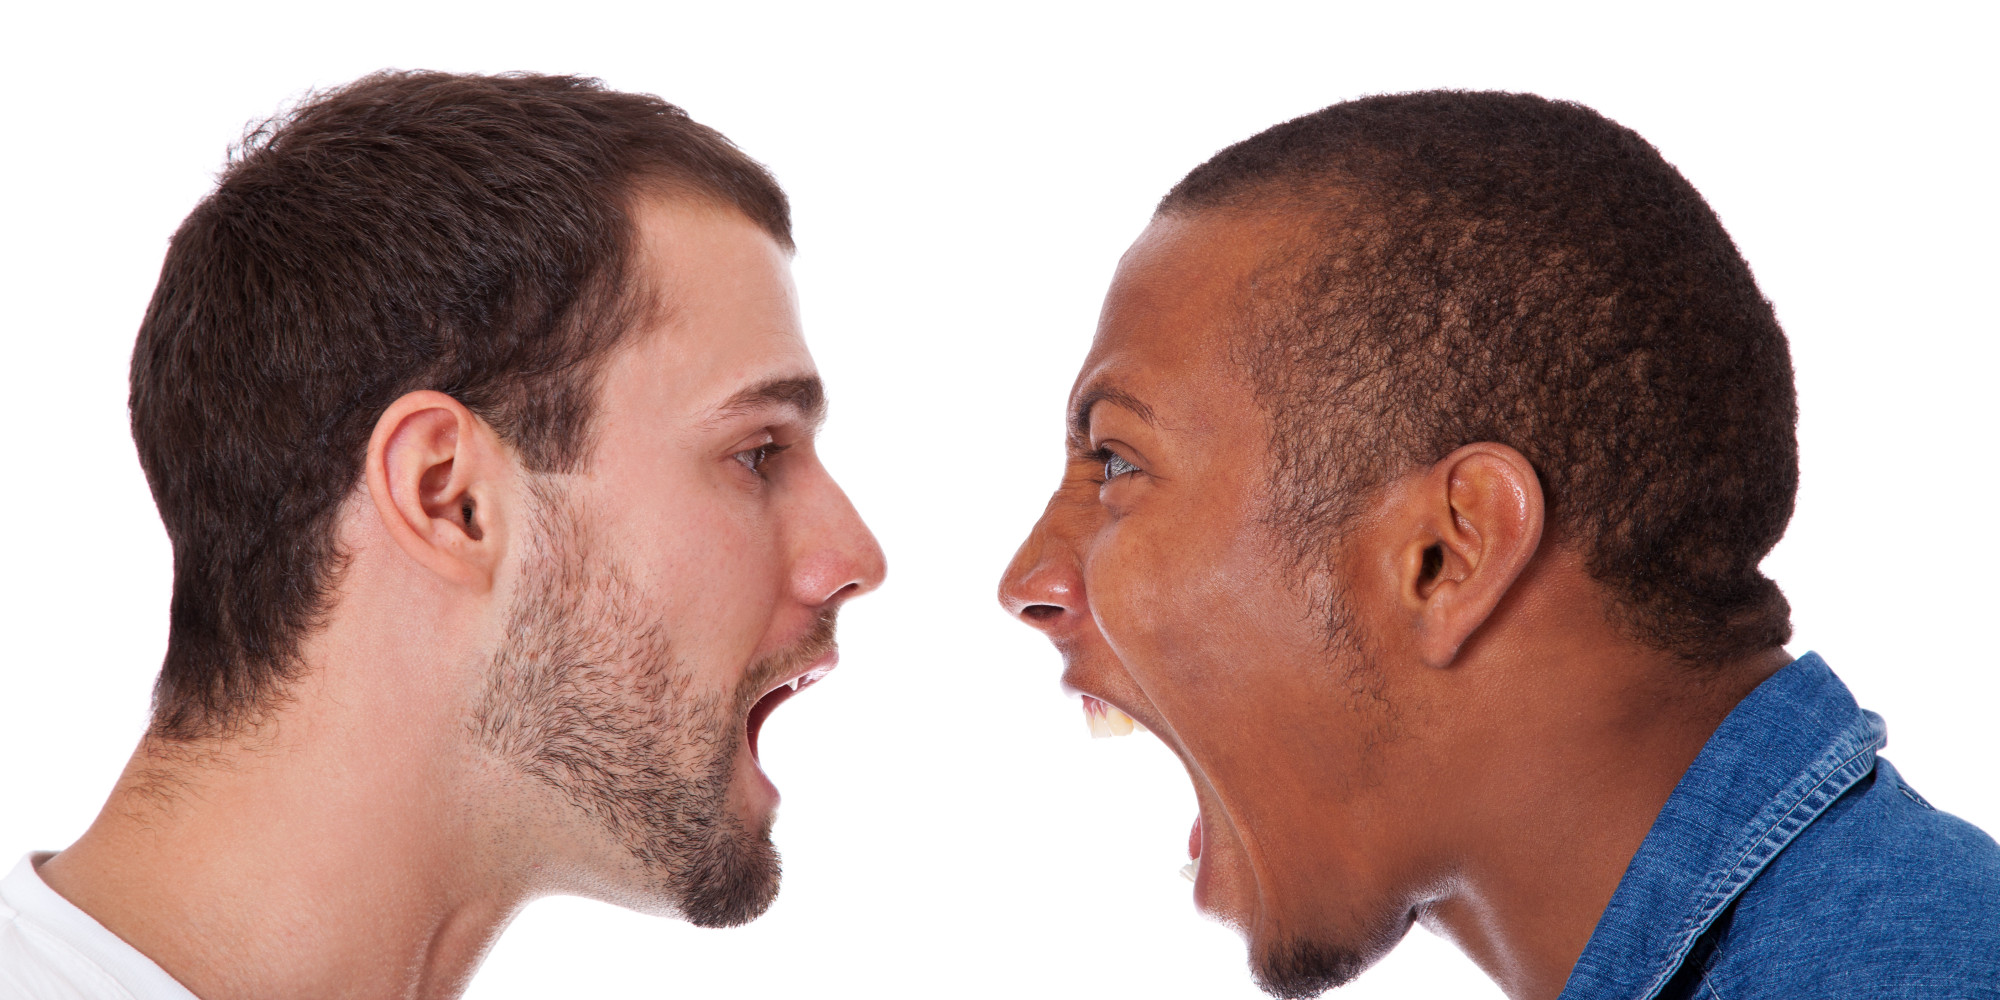 Two men yelling at each other